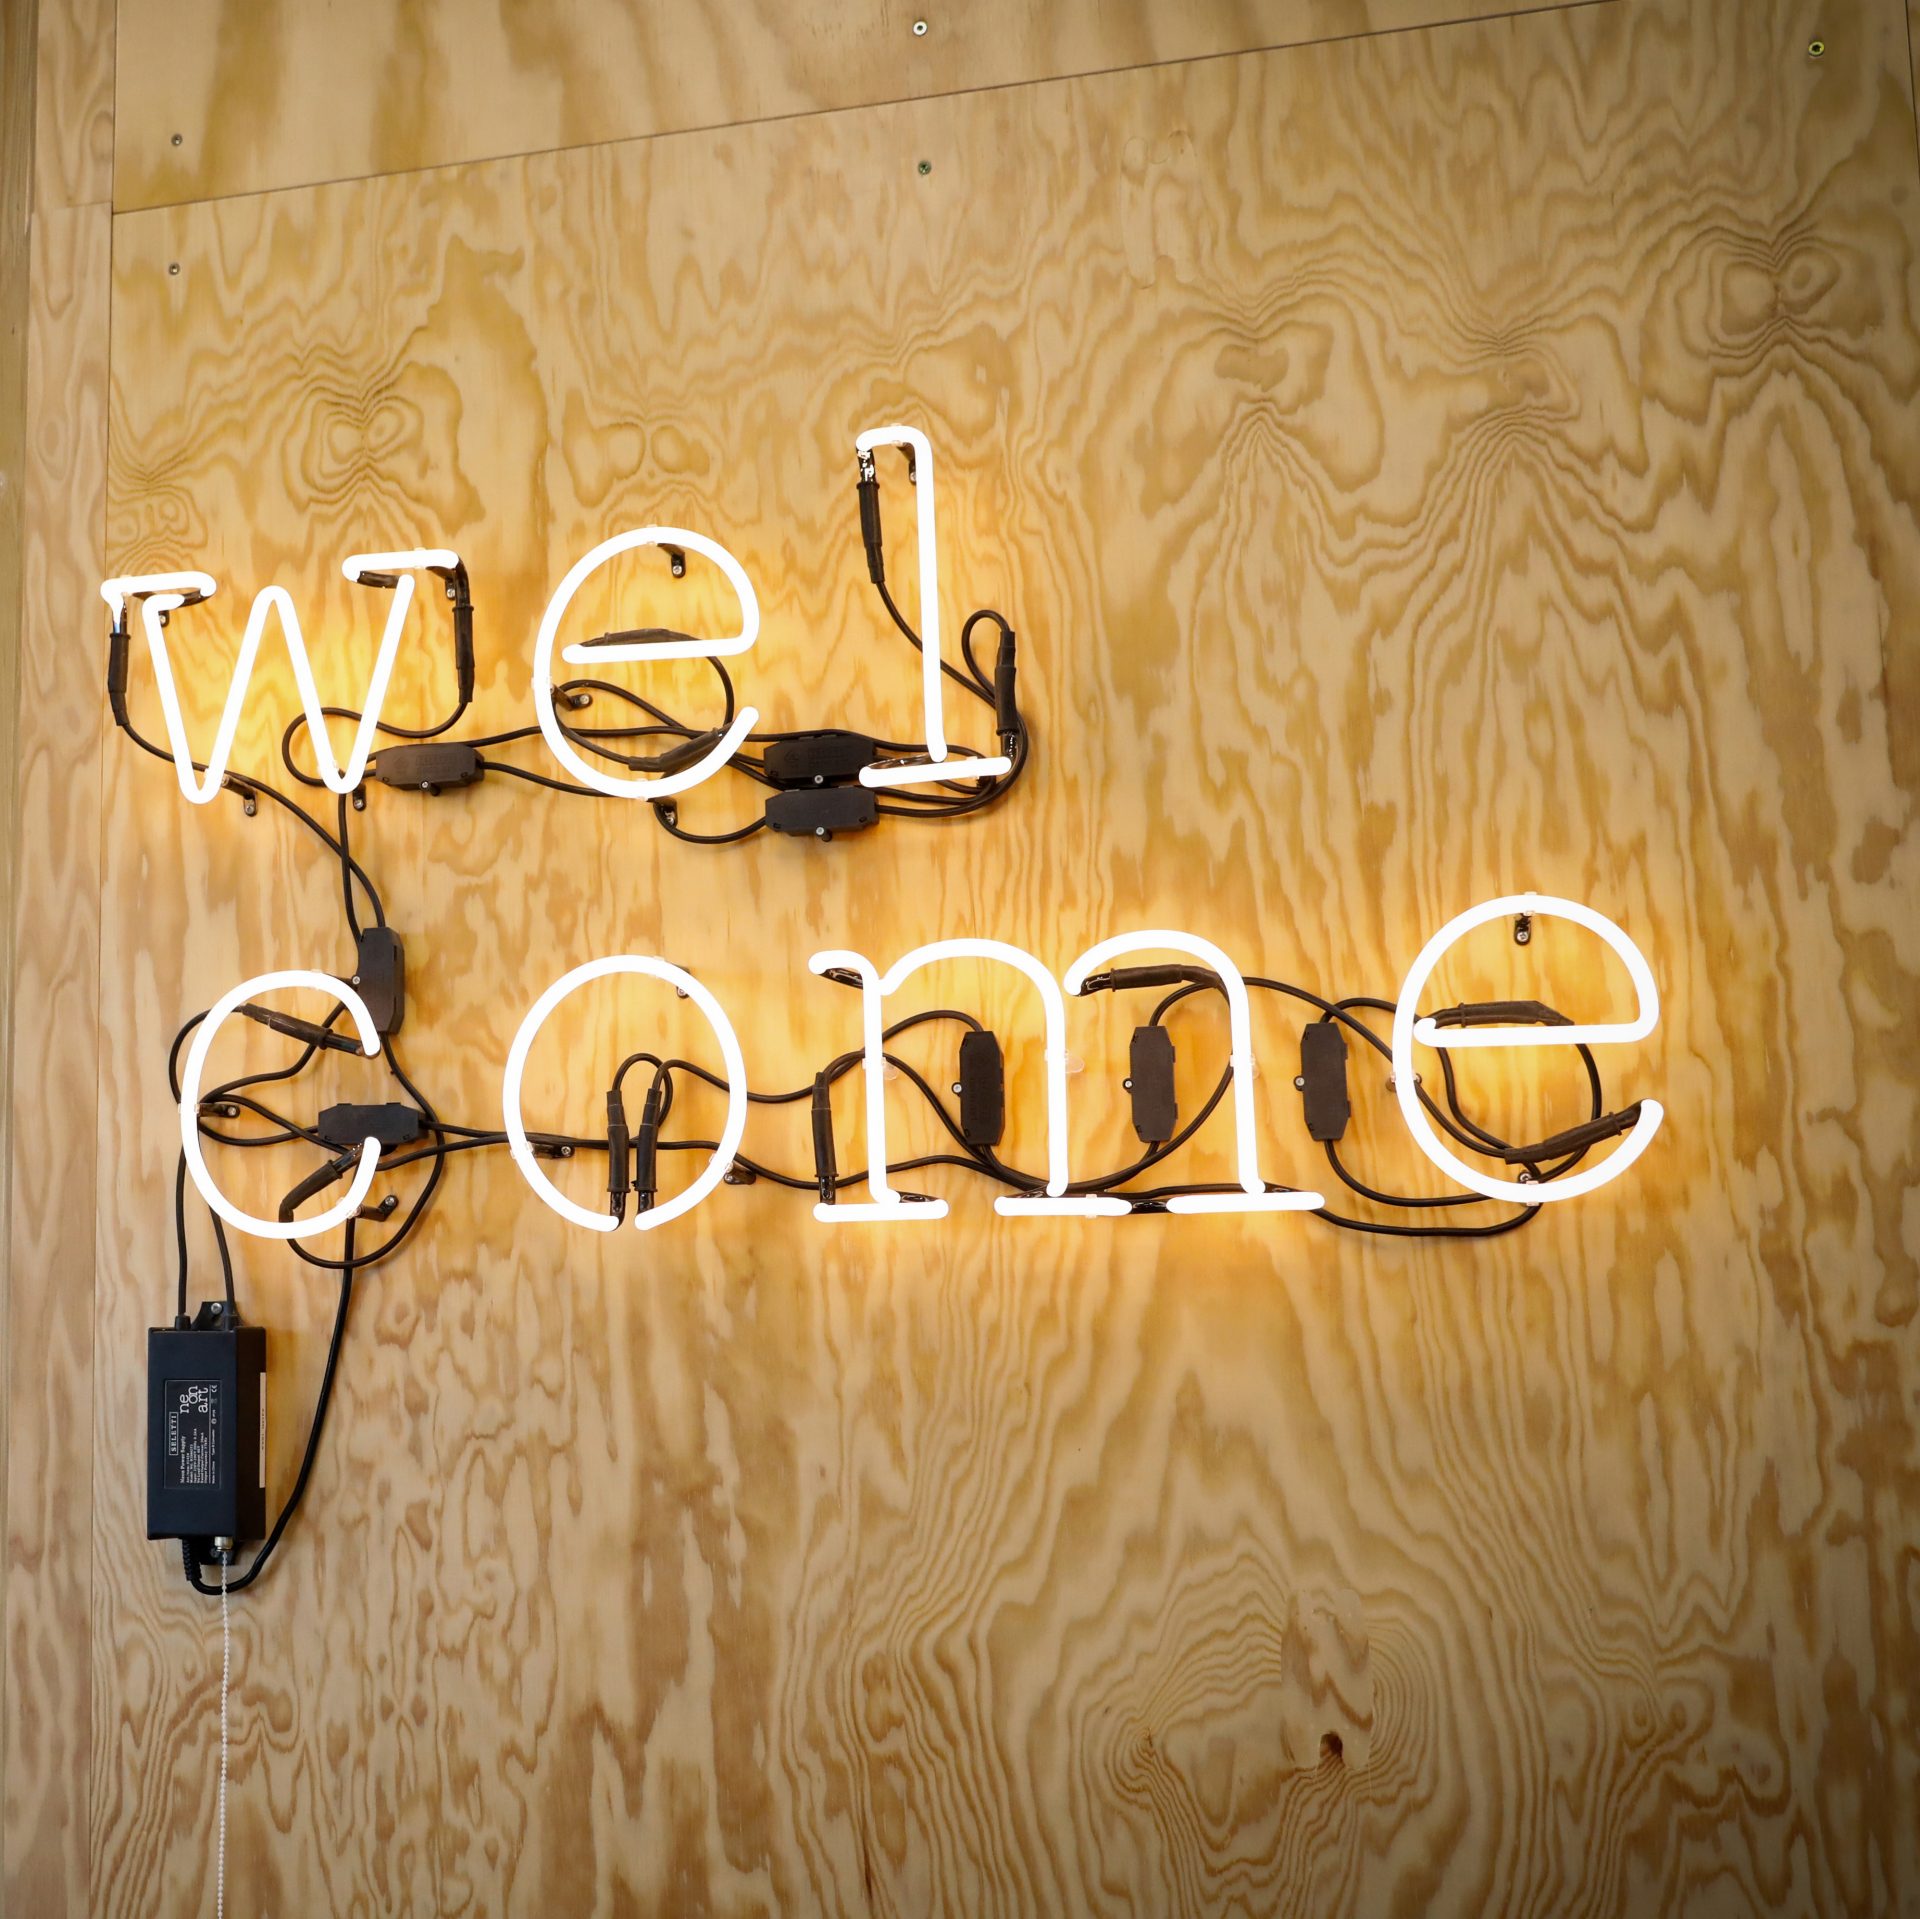 The picture shows the word "Welcome" in neon letters on a wooden wall.